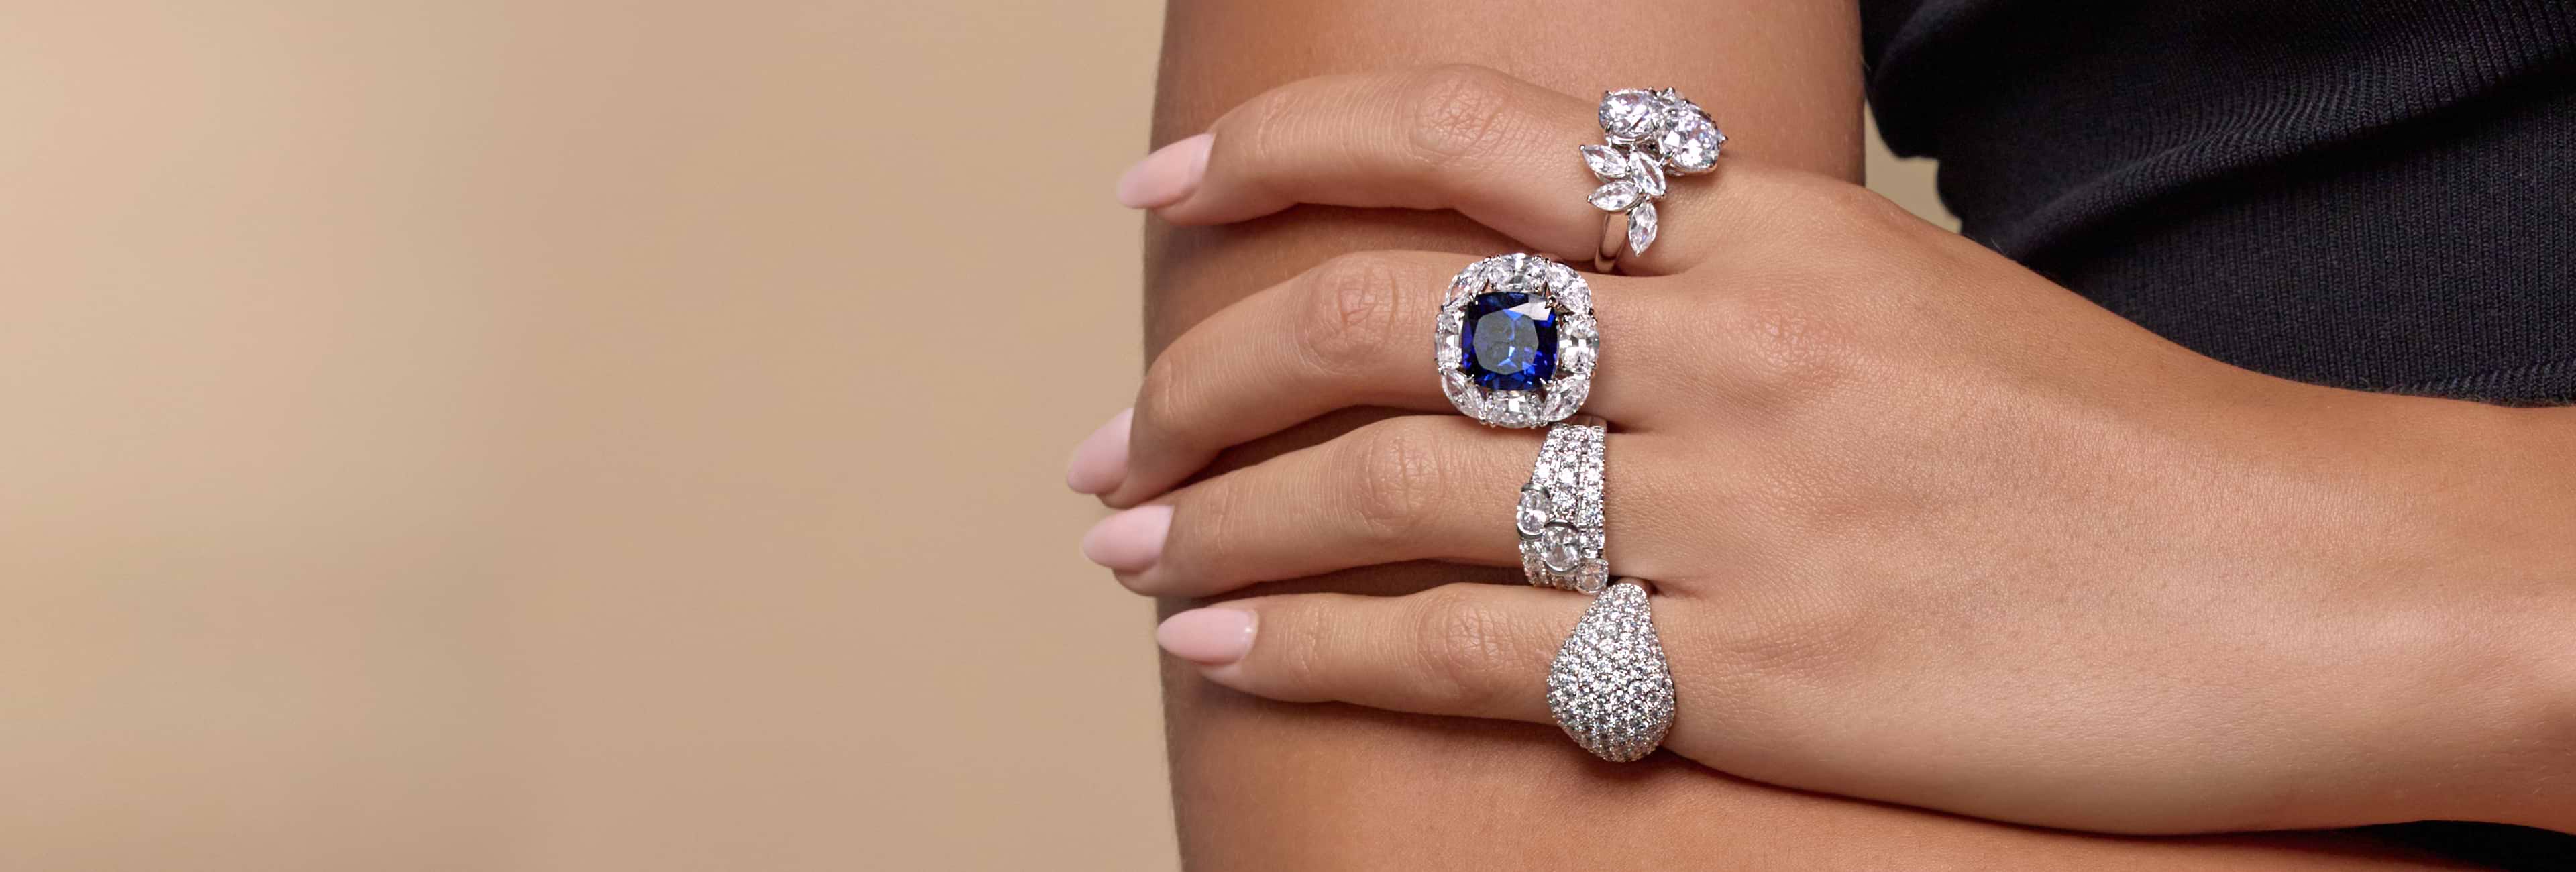 White woman's hand wearing four different fashion rings